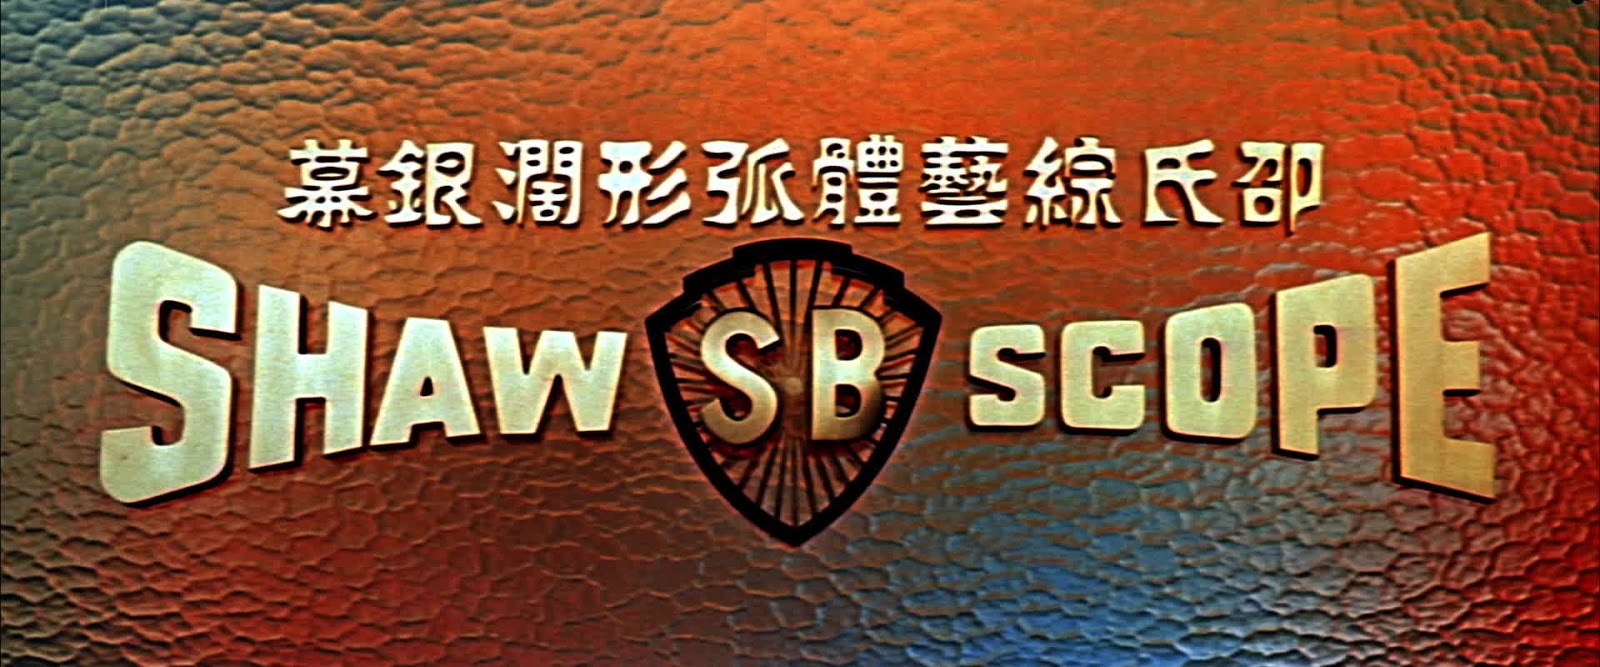 Shaw Brothers screen